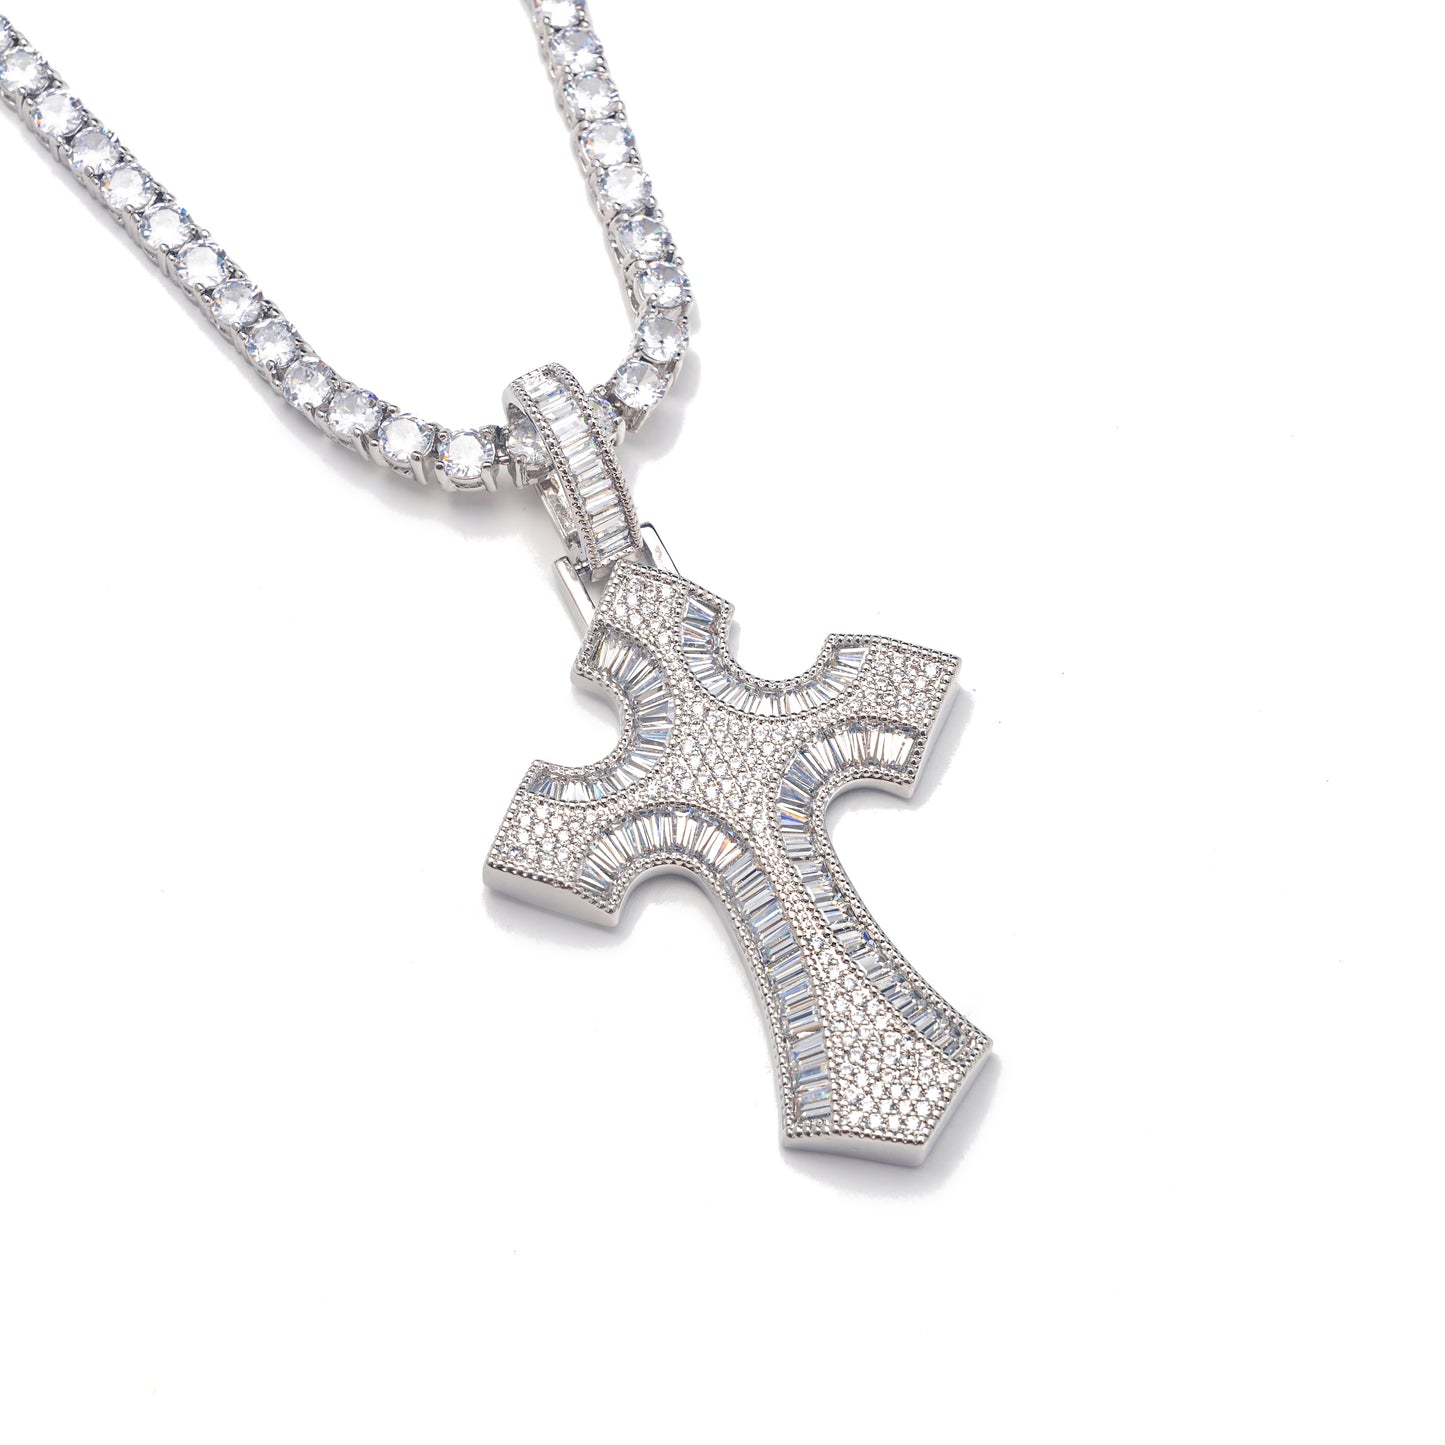 ICY GOTHIC CROSS NECKLACE